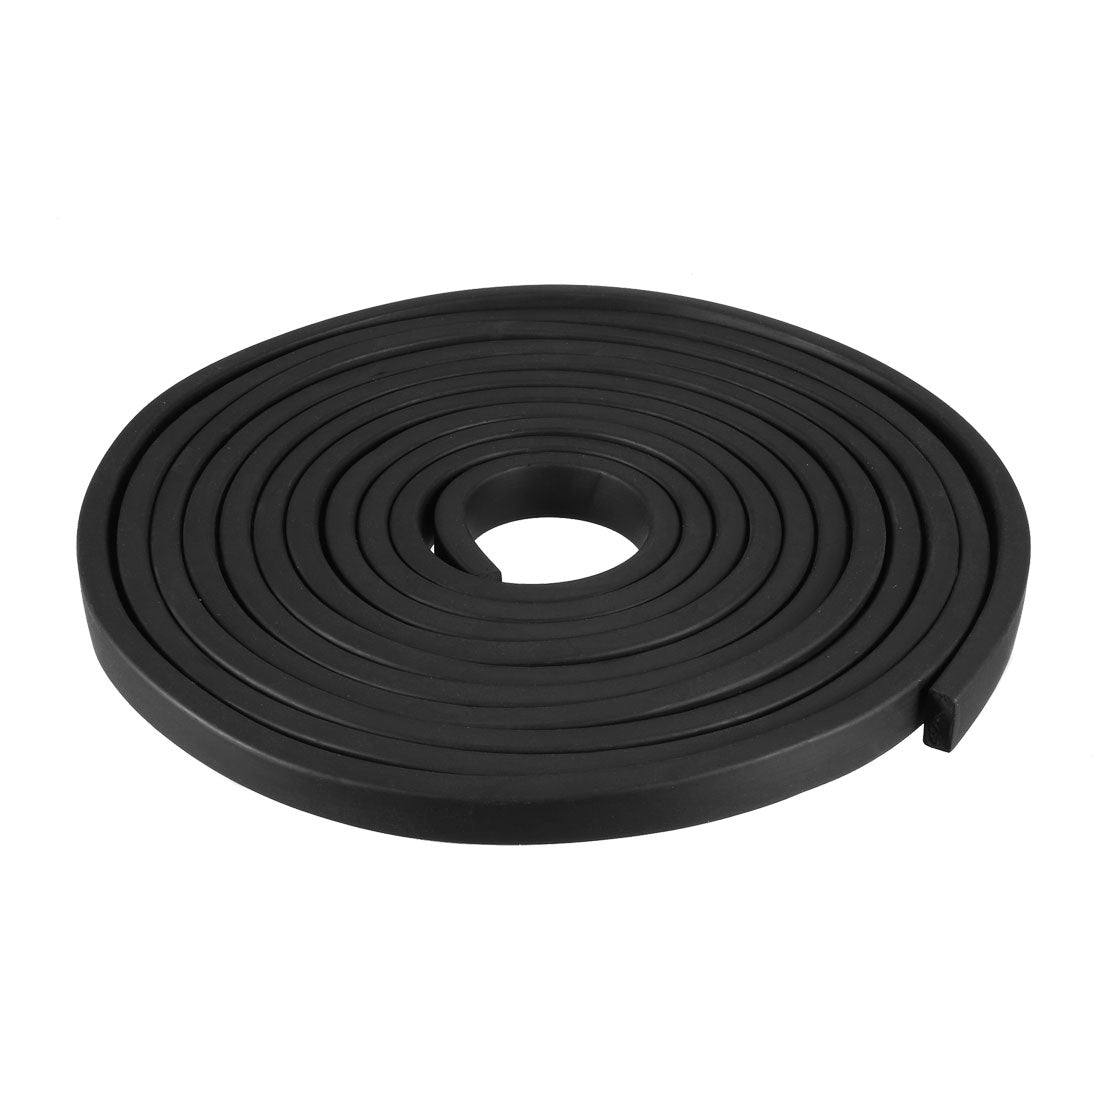 uxcell Uxcell Solid Rectangle Rubber Seal Strip 10mm Wide 5mm Thick, 3 Meters Long Black